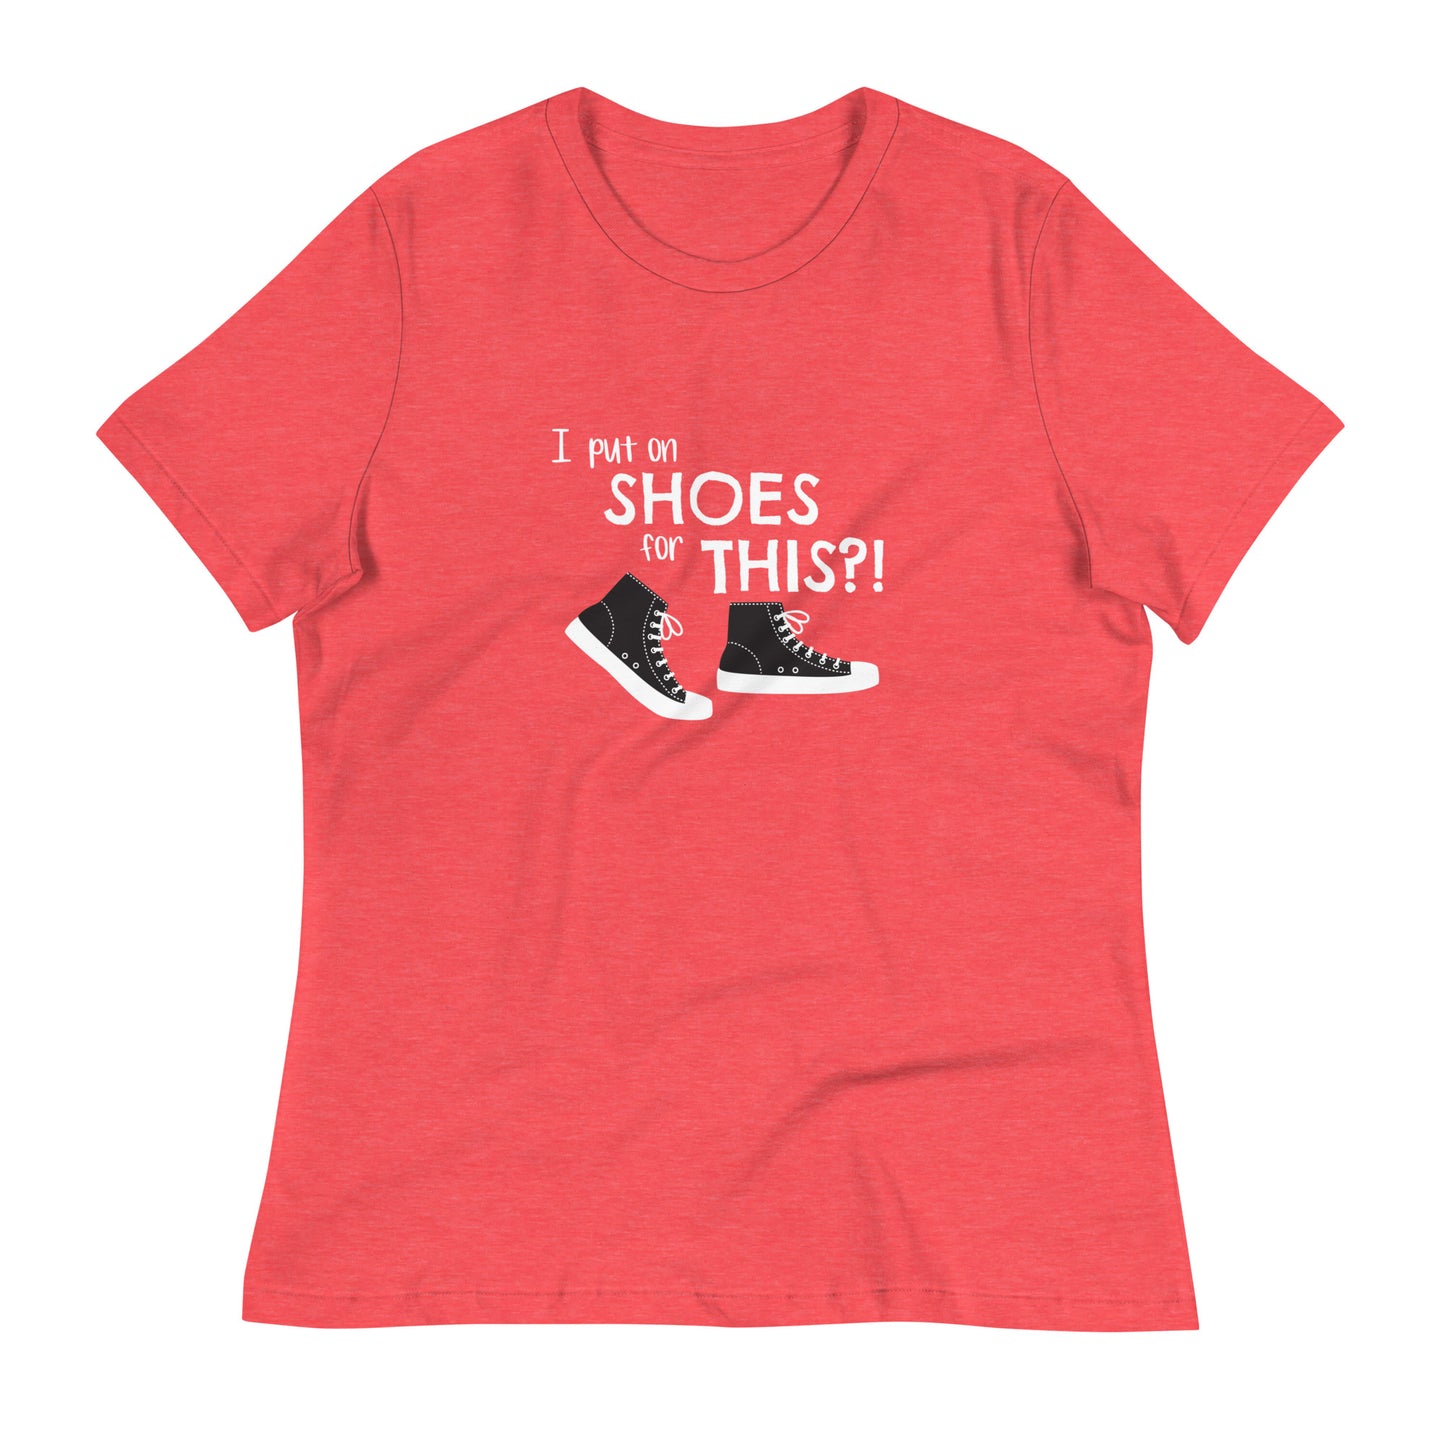 Heather Red women's relaxed fit t-shirt with graphic of black and white canvas "chuck" sneakers and text: "I put on SHOES for THIS?!"